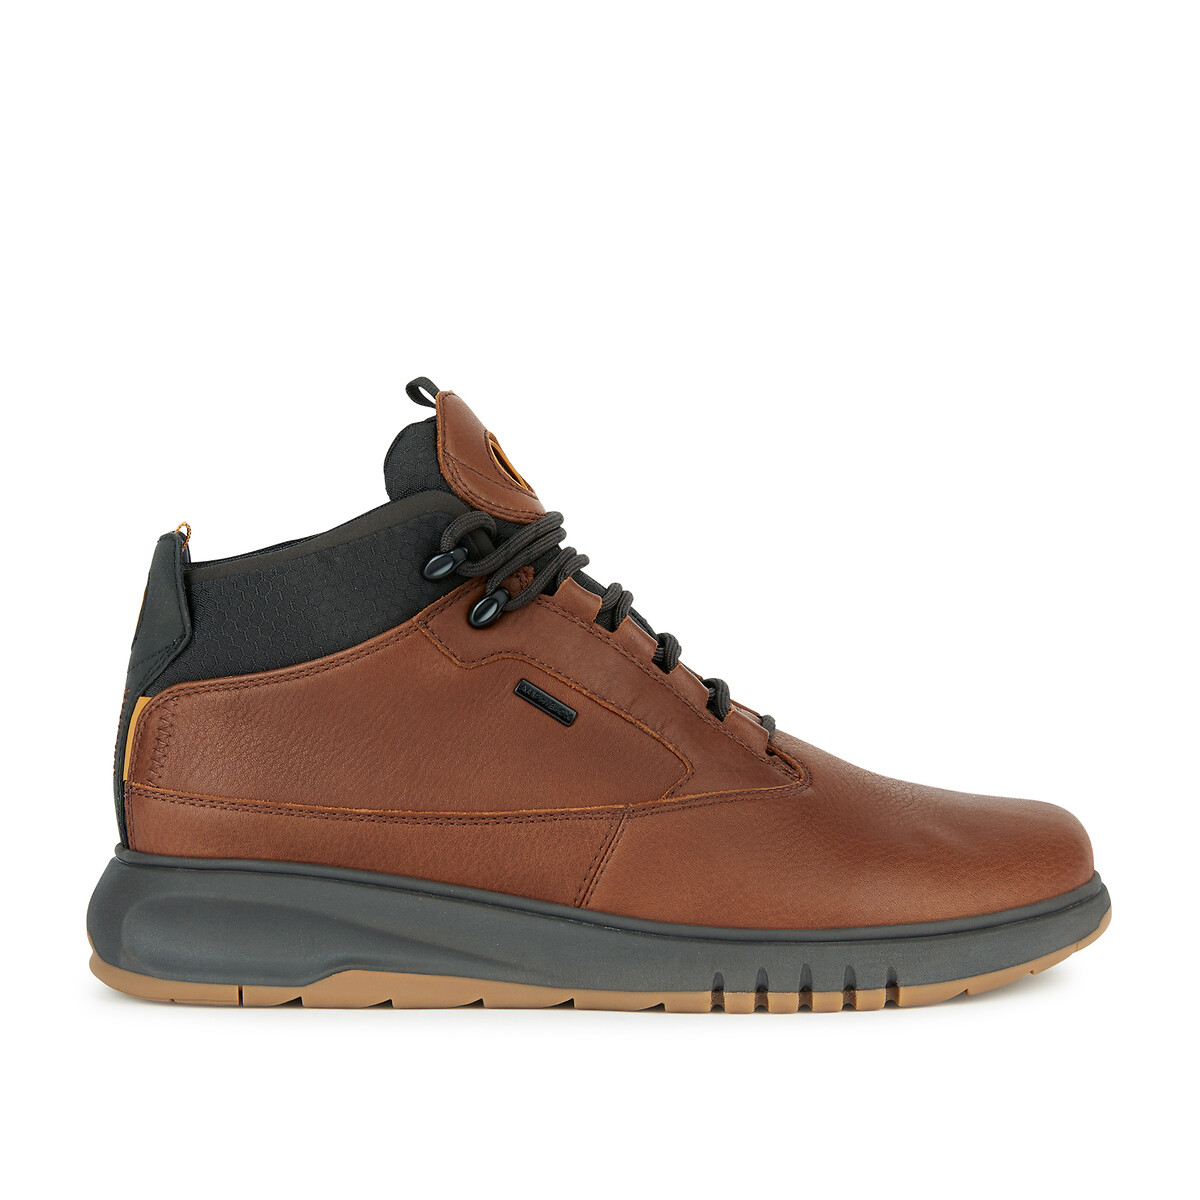 Image of Aerantis Amphibiox High Top Trainers in Leather